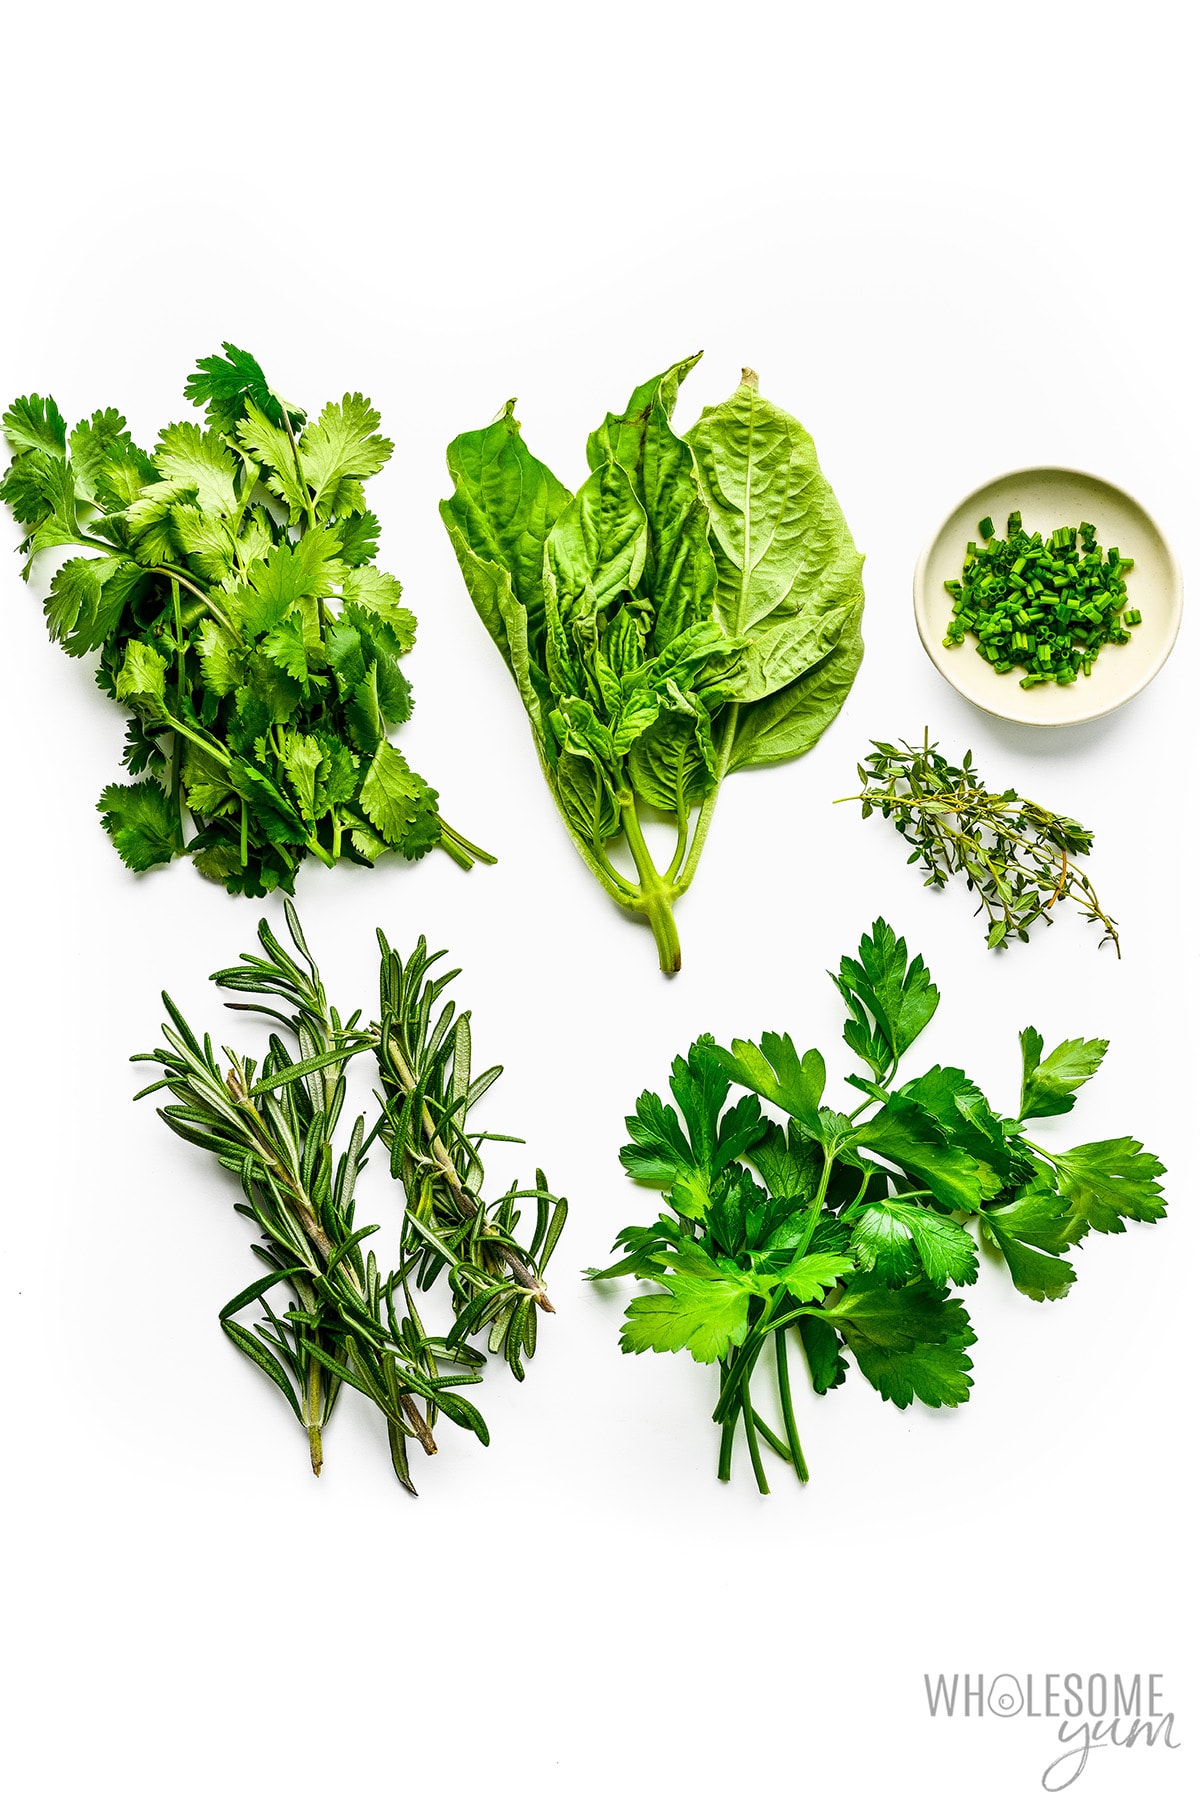 Low carb fresh herbs for a low carb foods list on white background.